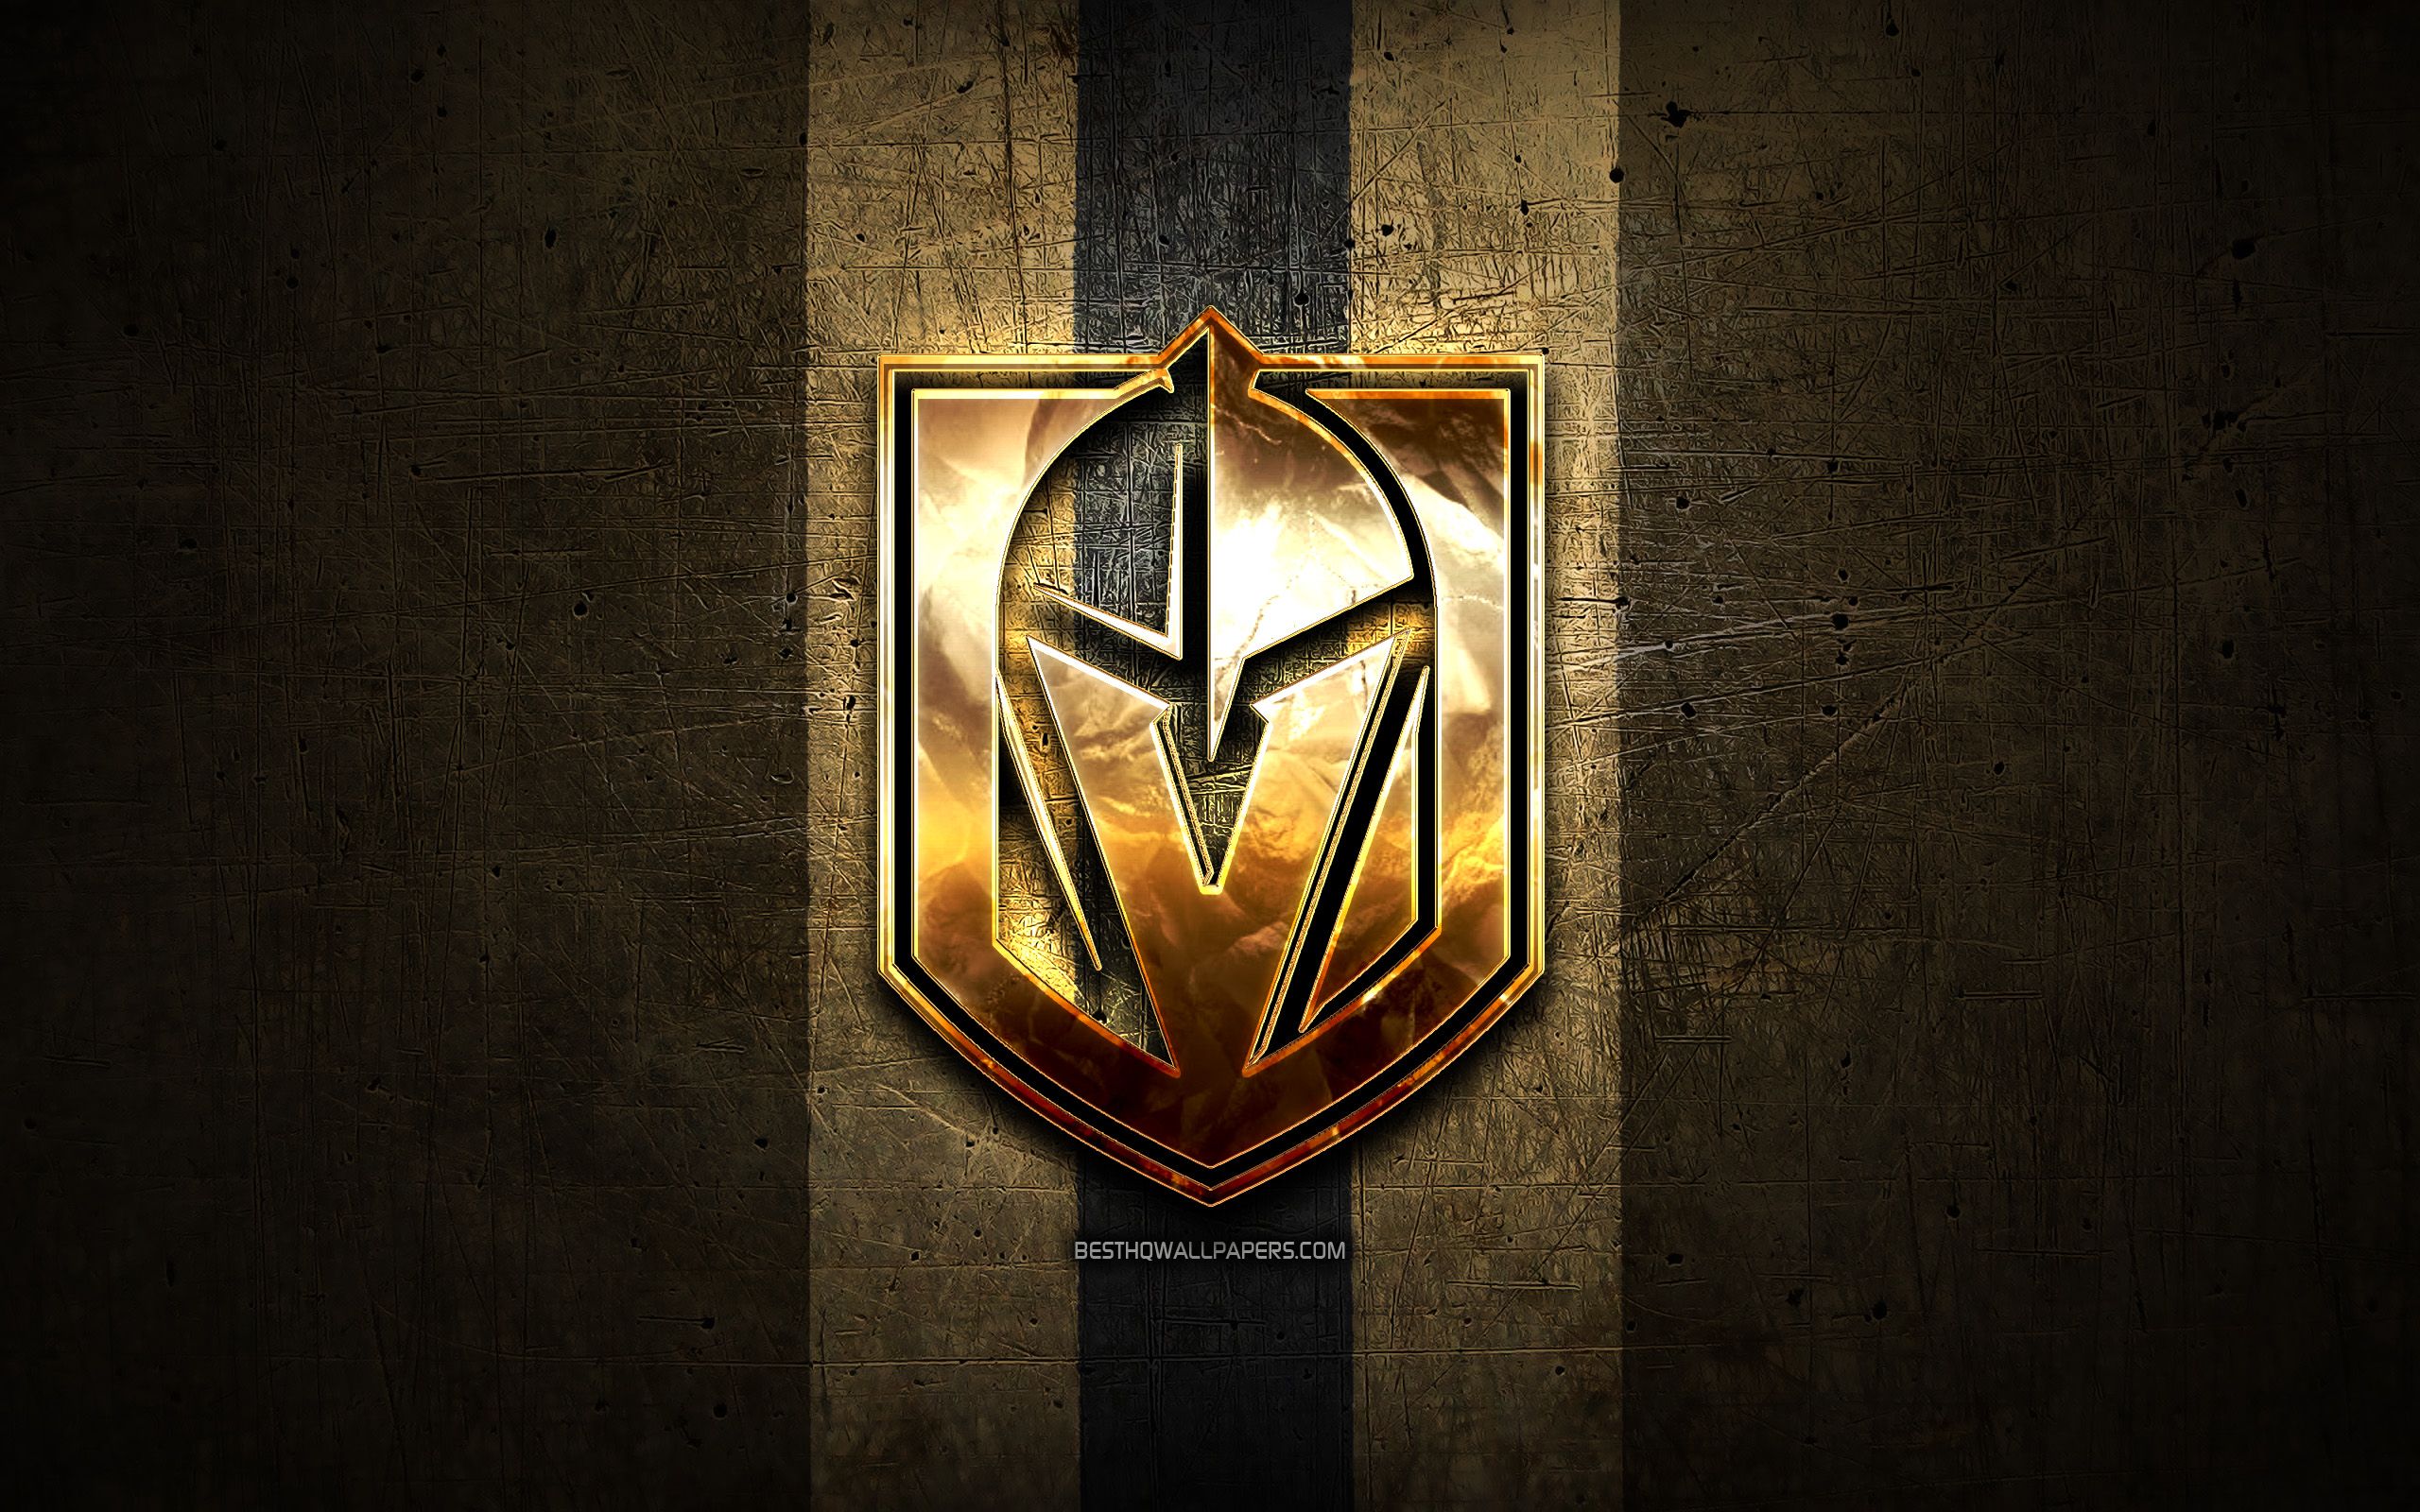 Download wallpaper Vegas Golden Knights, golden logo, NHL, brown metal background, american hockey team, National Hockey League, Vegas Golden Knights logo, hockey, USA for desktop with resolution 2560x1600. High Quality HD picture